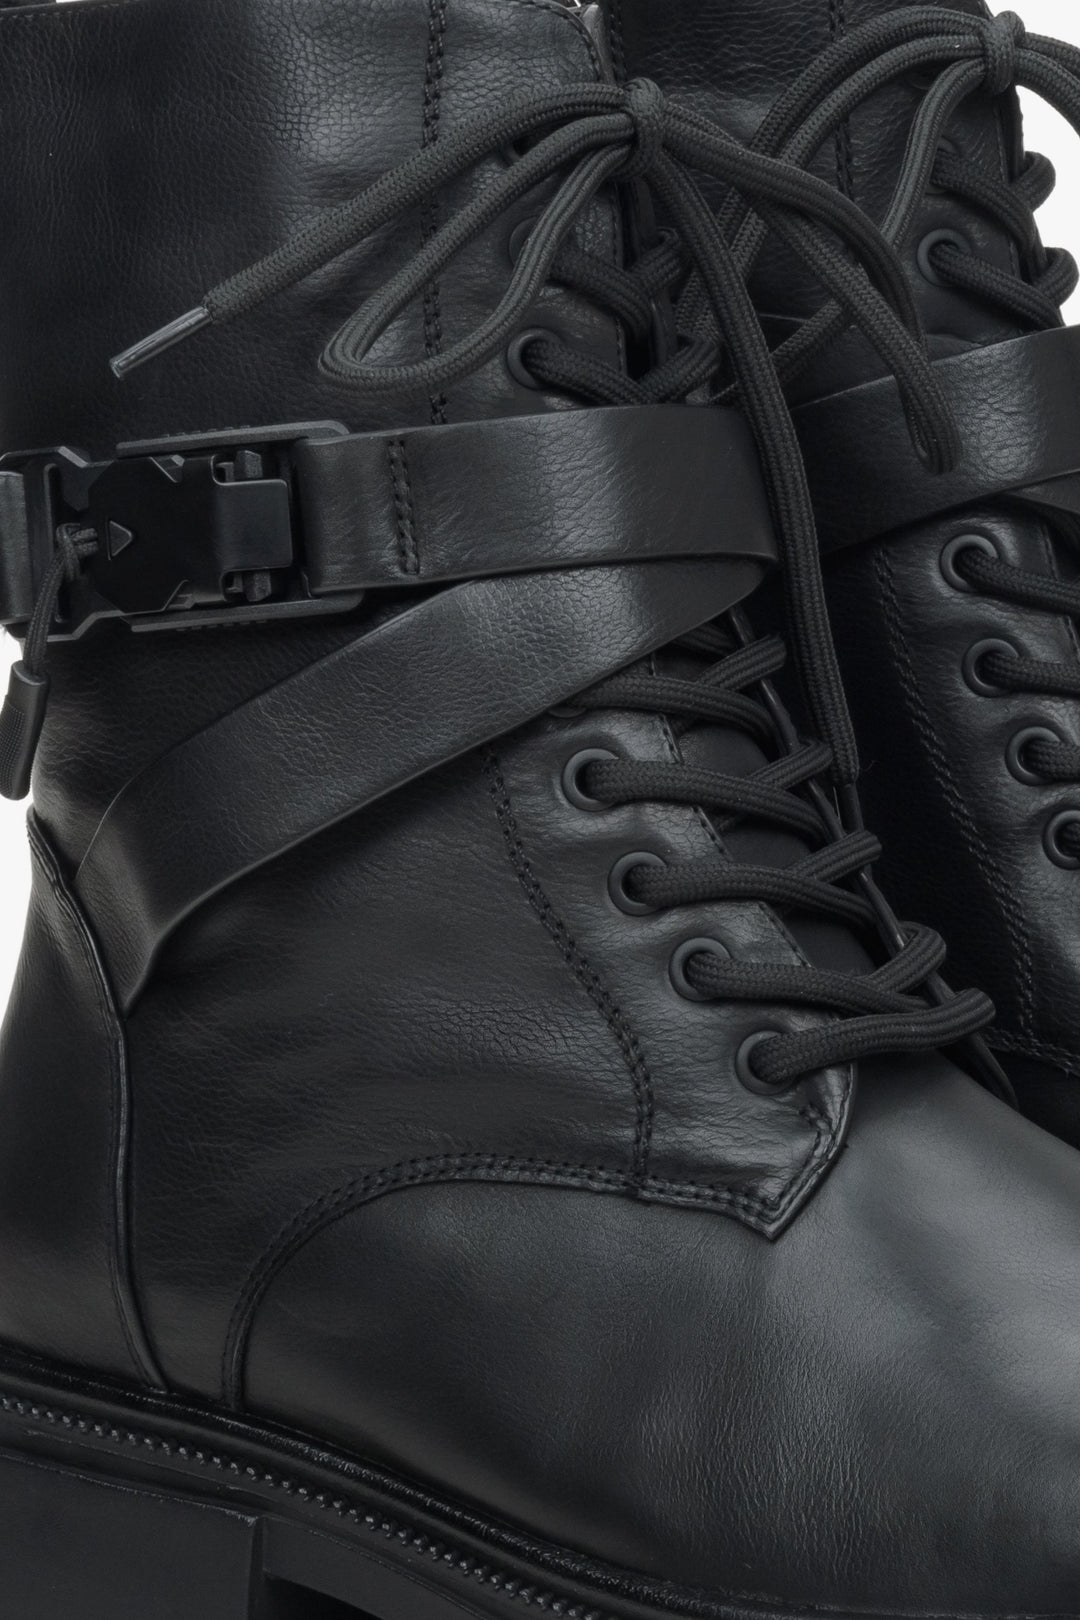 Women's black leather winter boots - close up on details.